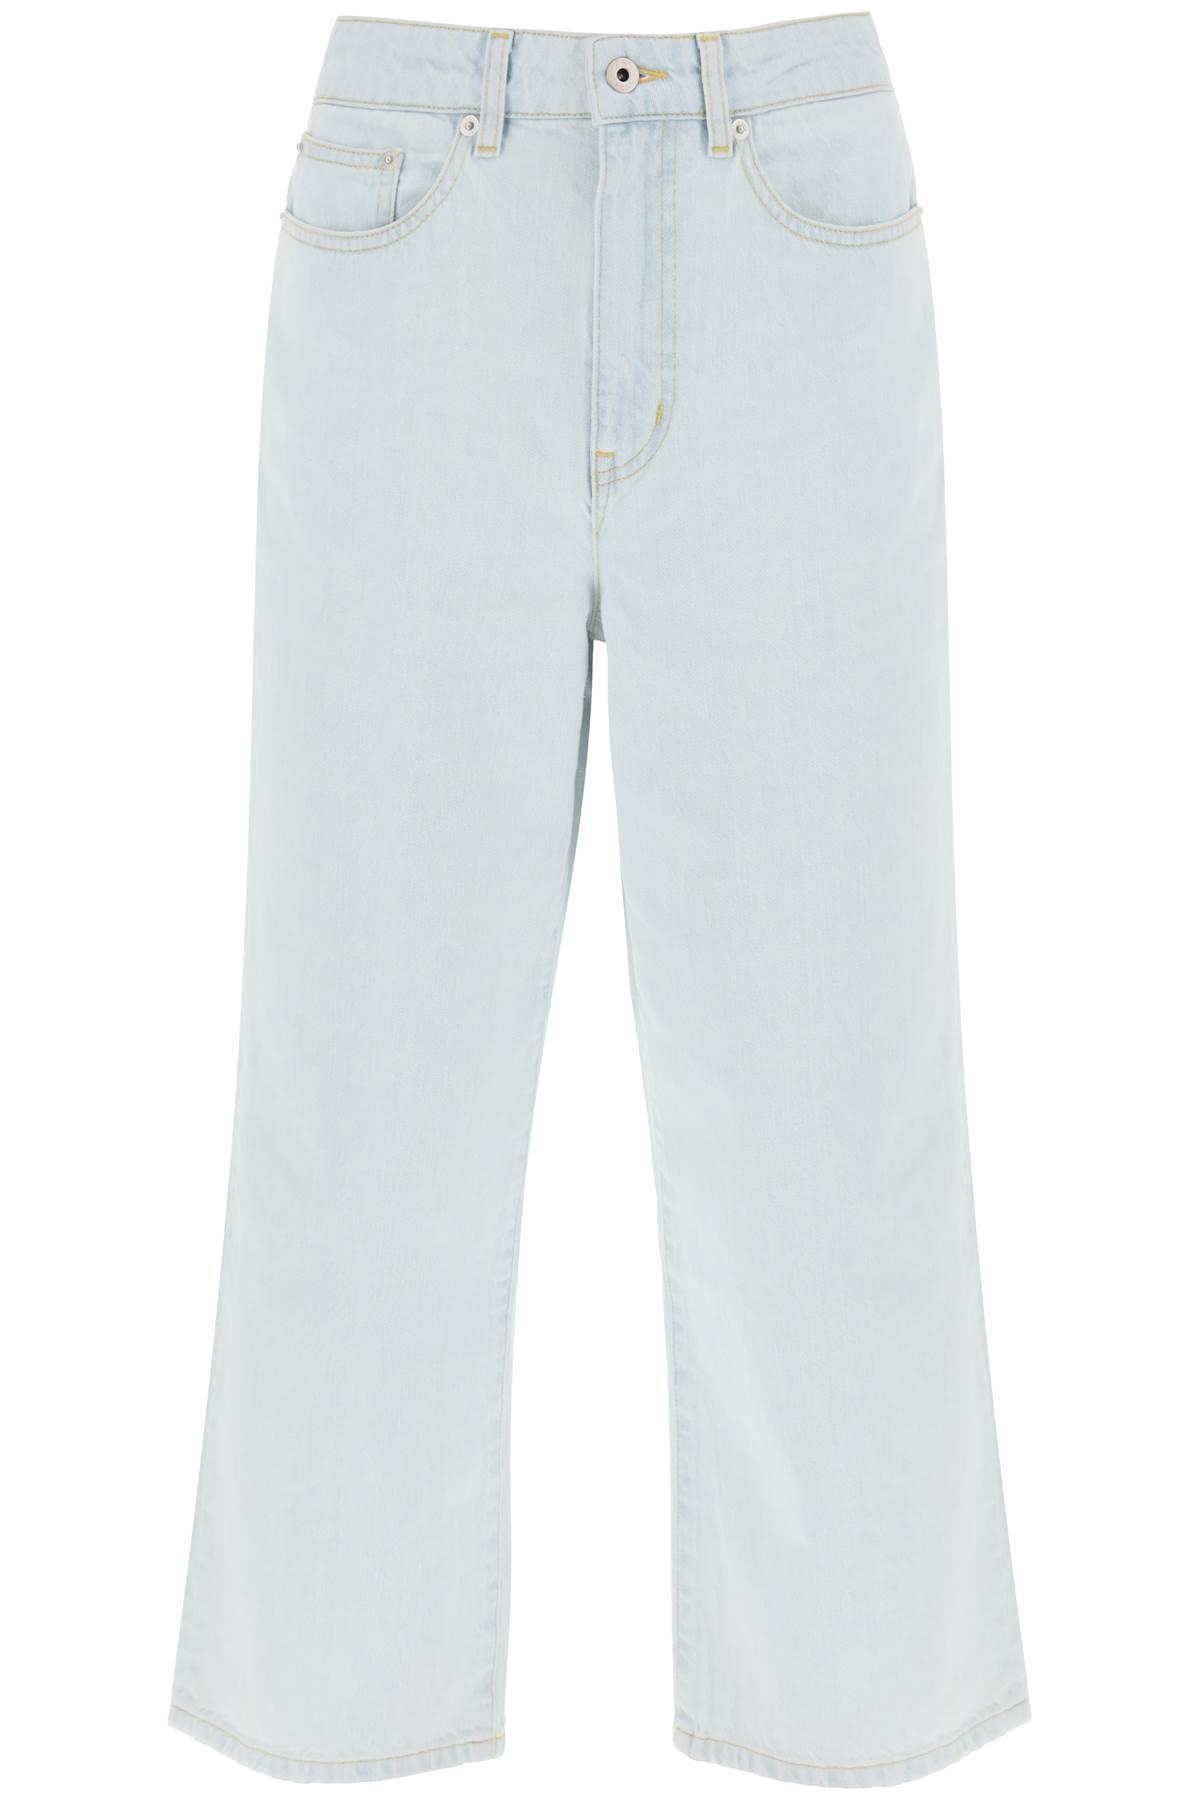 Kenzo 'Sumire' Cropped Jeans With Wide Leg - 1